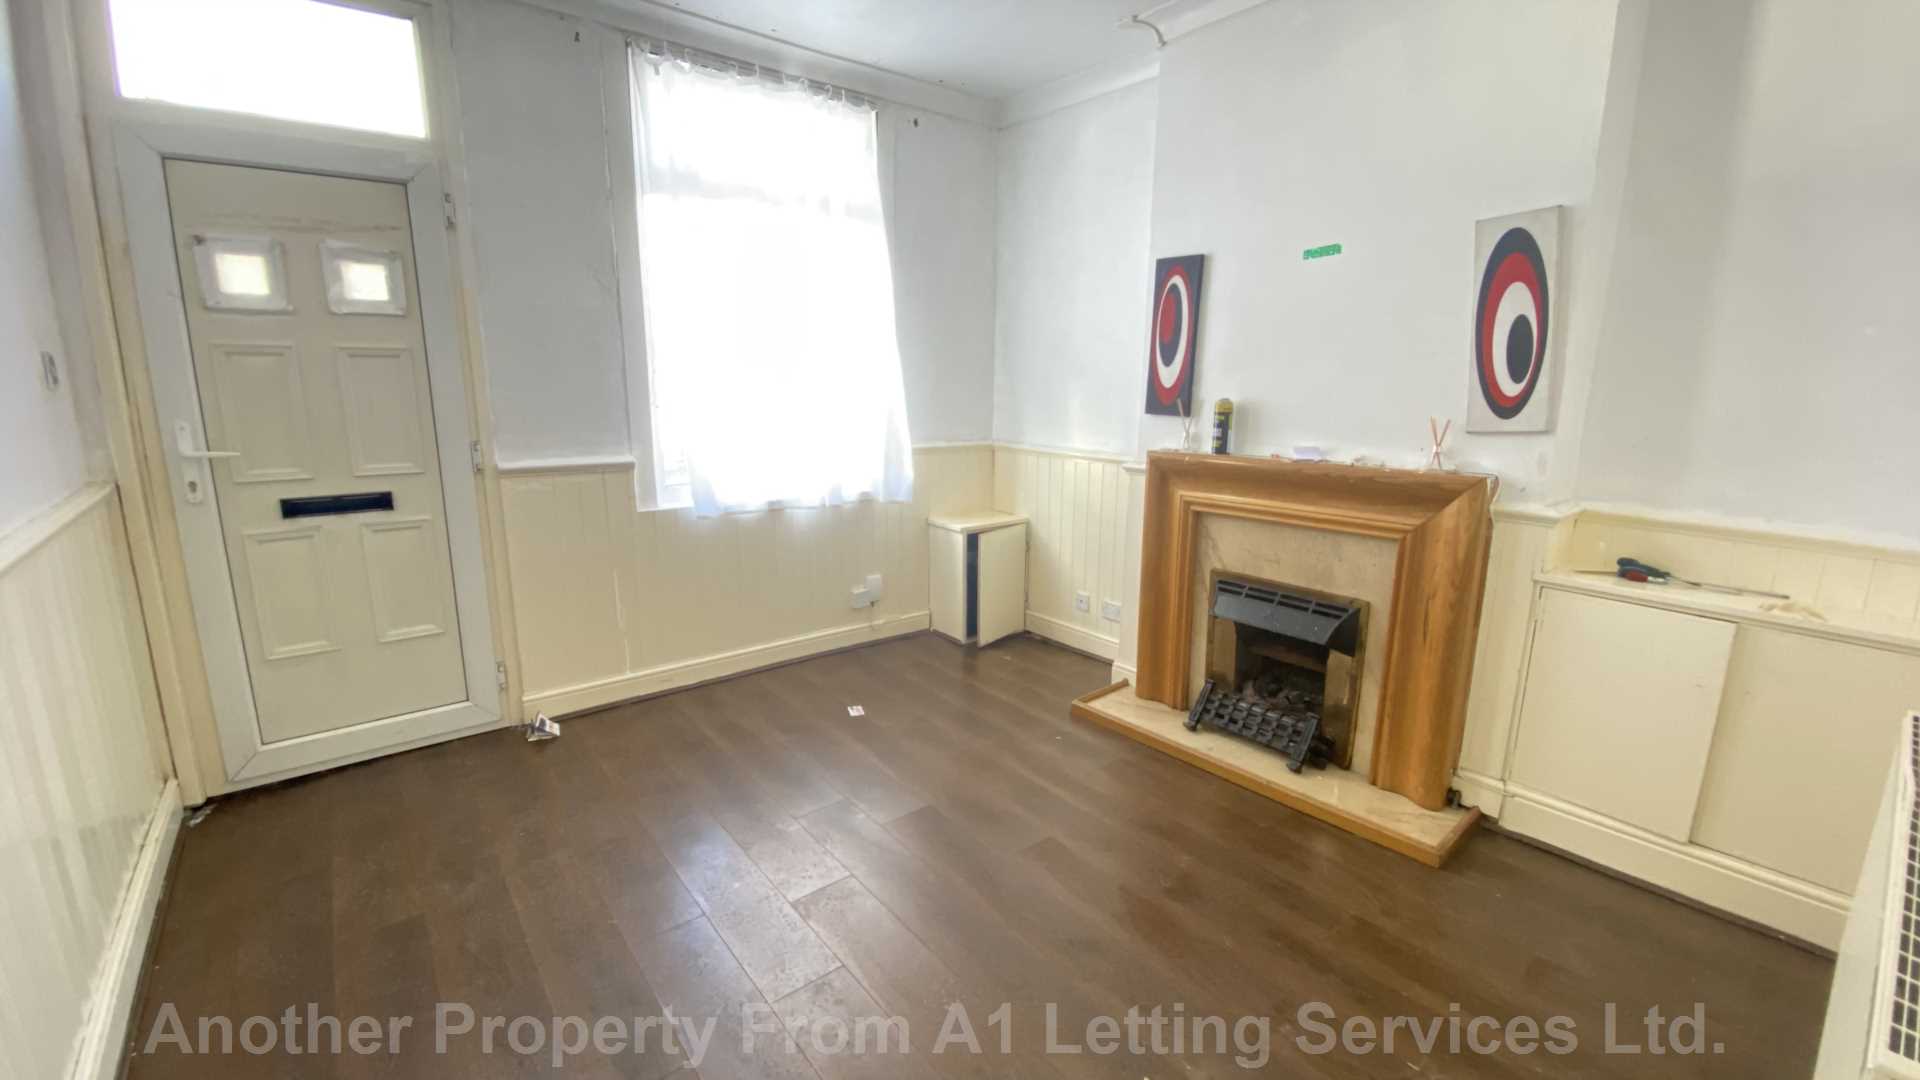 2 bed Mid Terraced House for rent in Birmingham. From A1 Letting Services